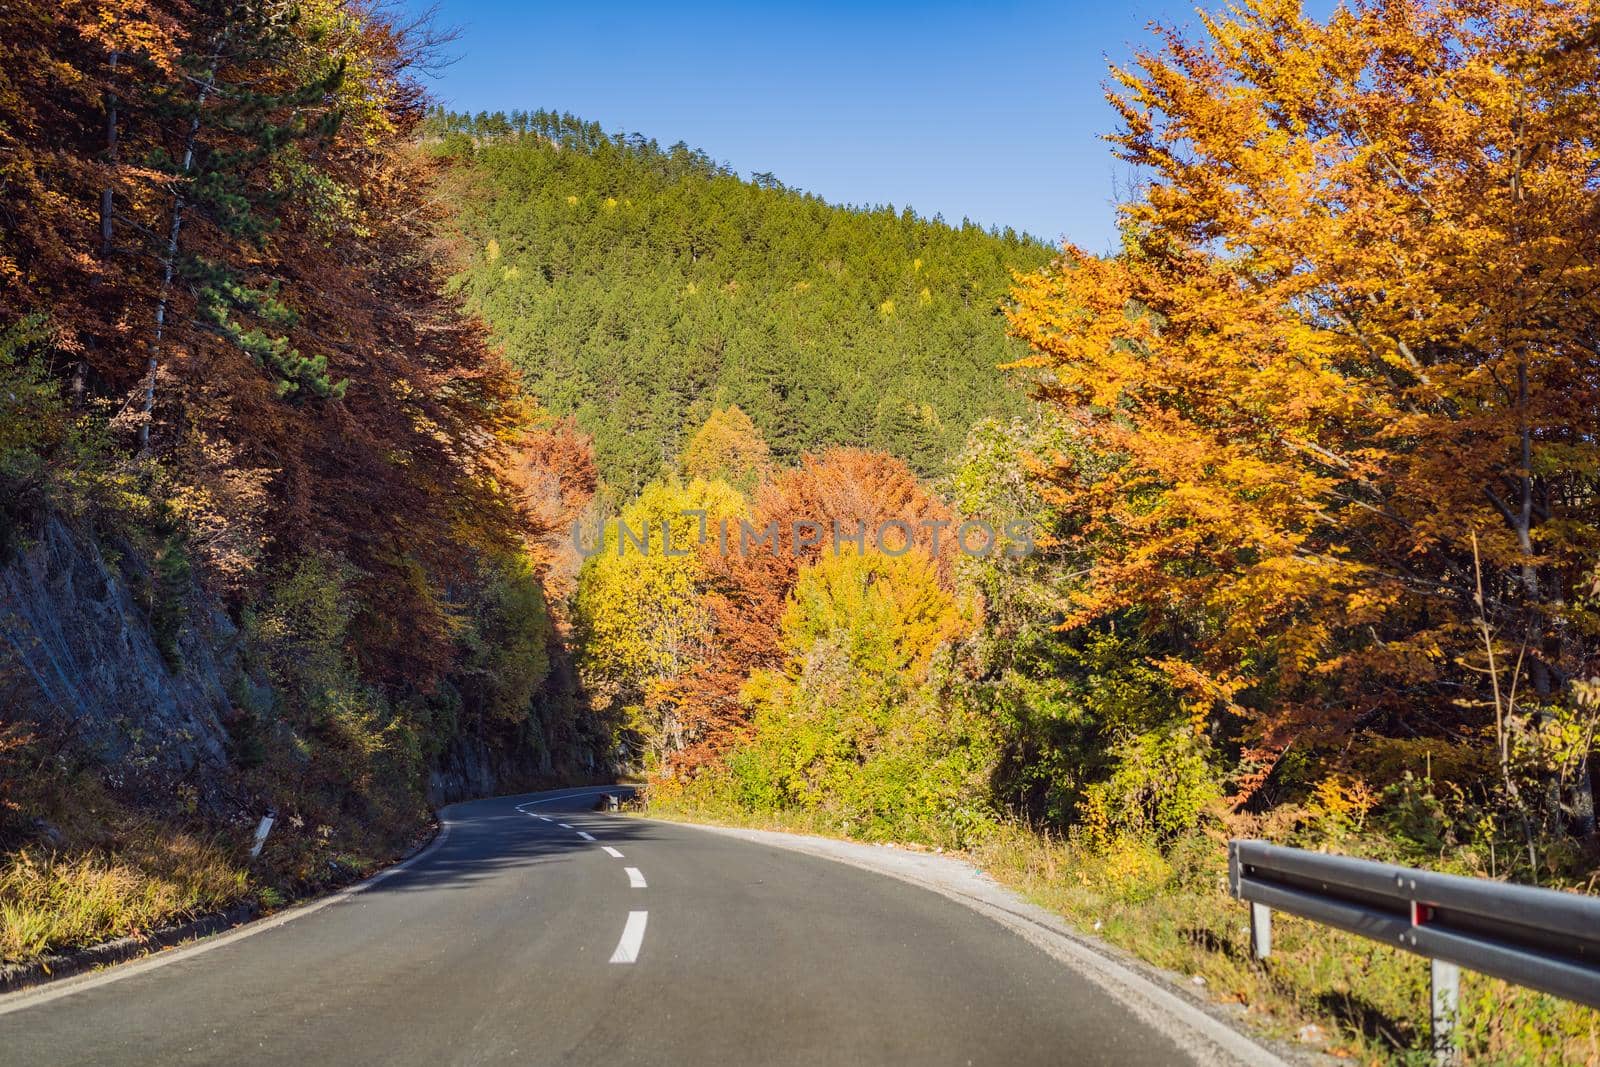 Beautiful autumn view of yellow trees, road and mountains, Montenegro.